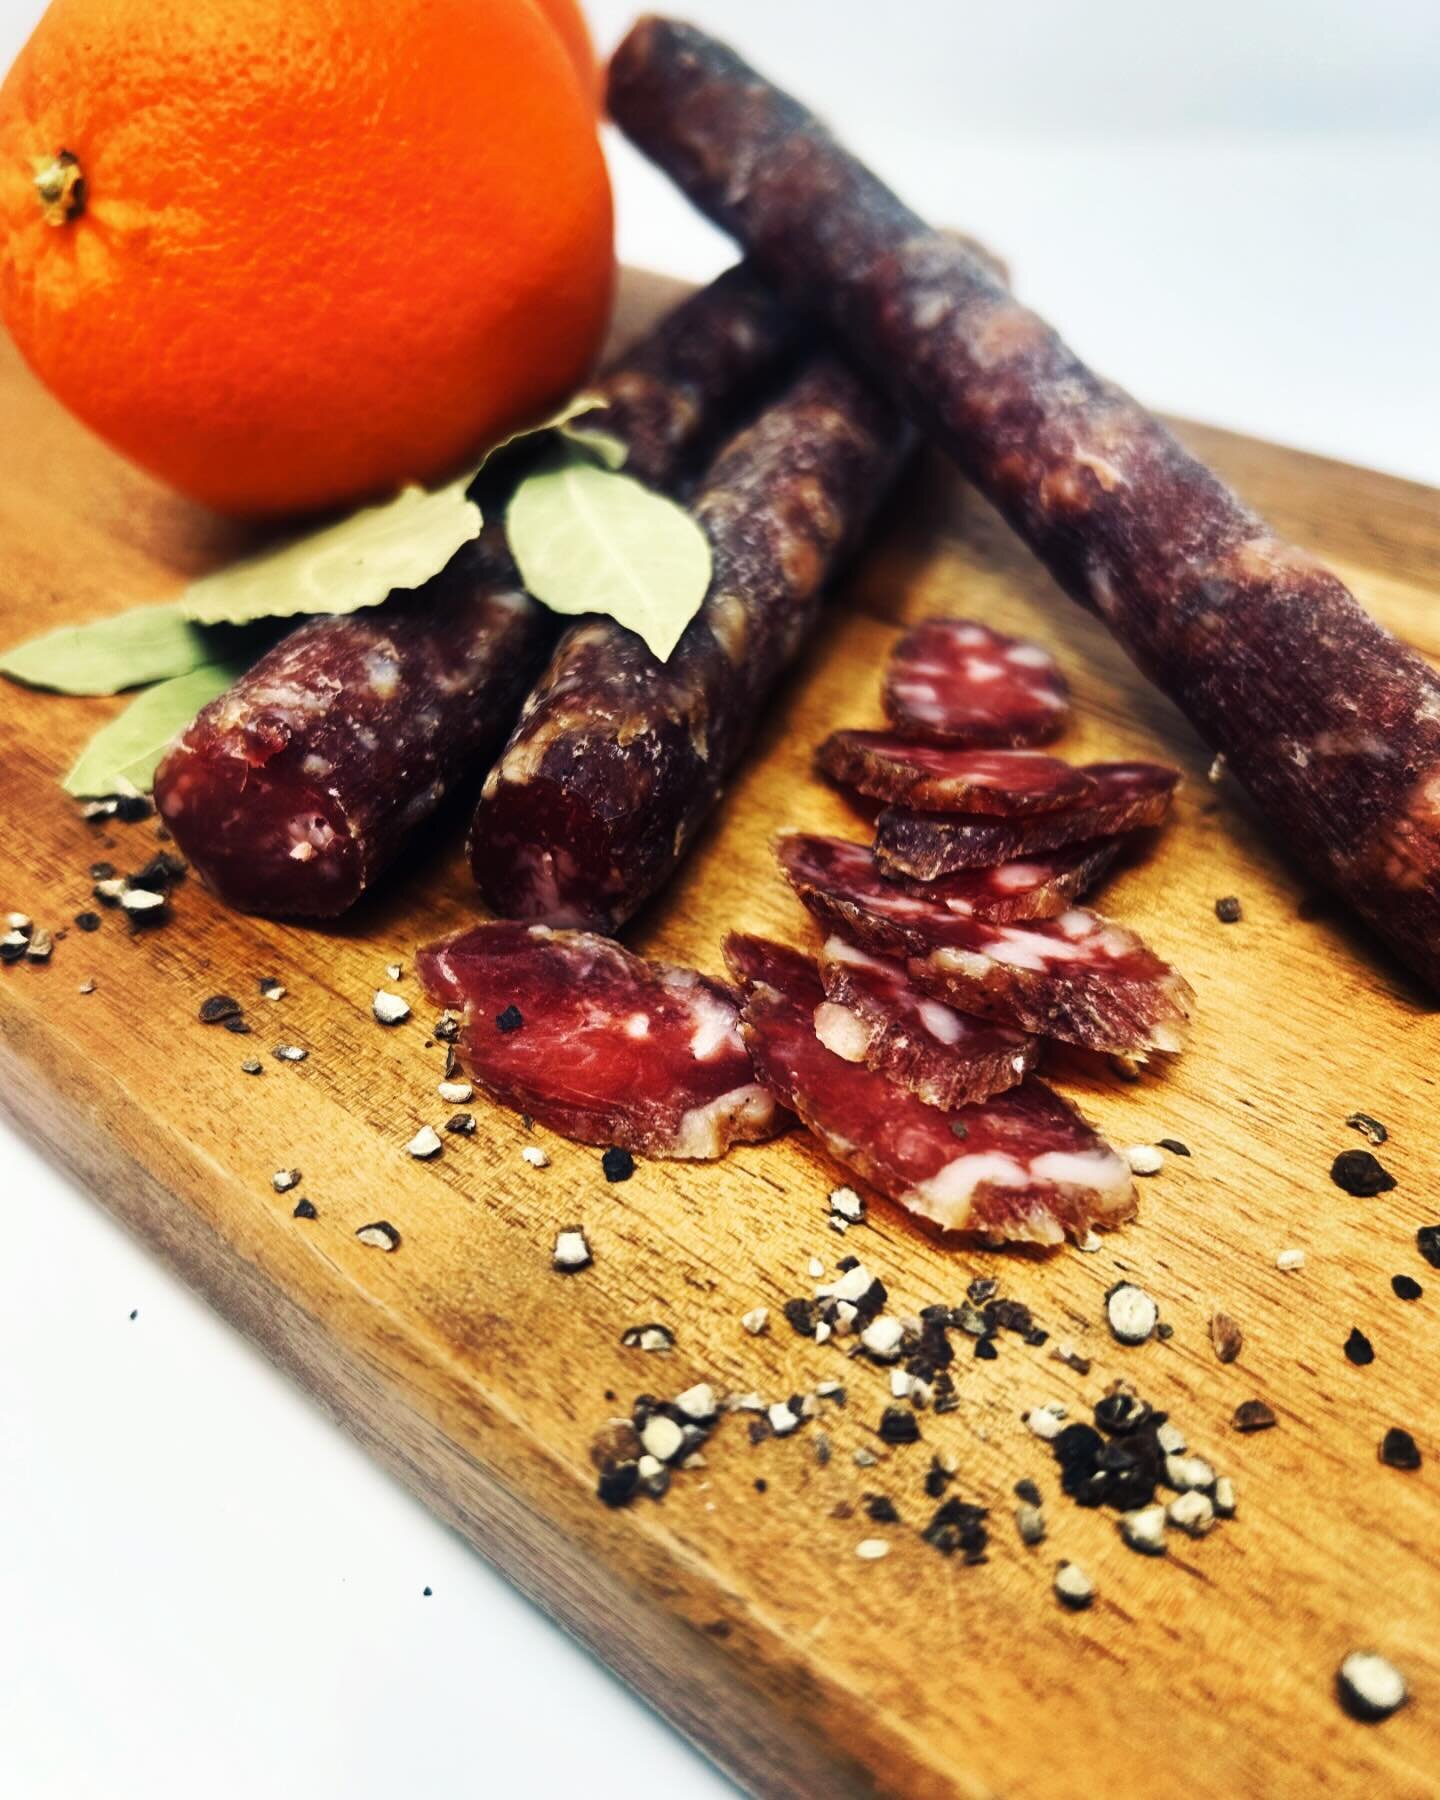 Anice e arancia salami is available this week. Orange zest and star anise round out the flavour profile of this week&rsquo;s salami. Available @strathconamarket @bountifulfarmersmarketyeg and part of @bibostrathcona charcuterie board. This week for c